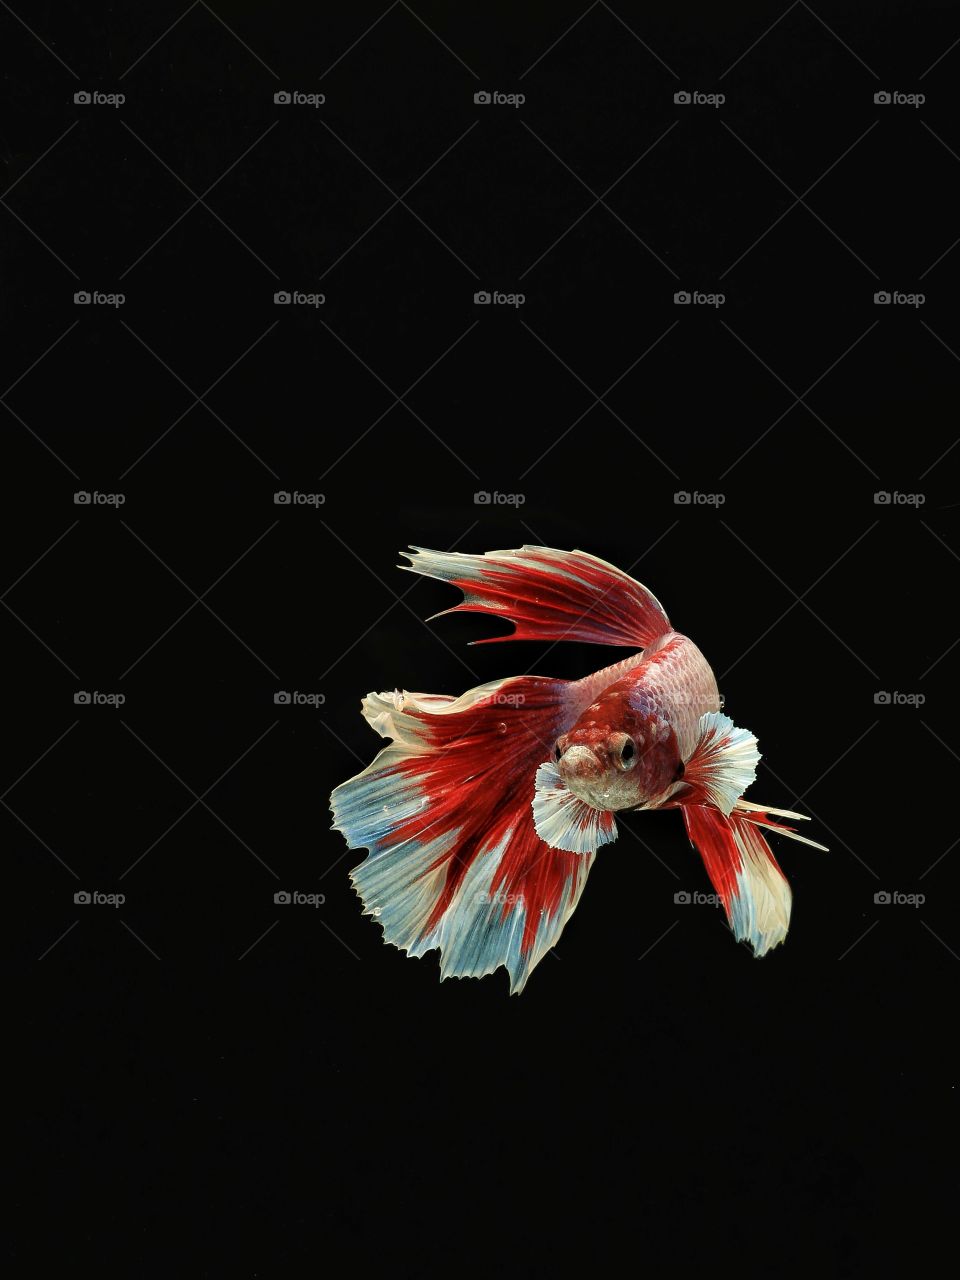 EXOTIC POSE
HALFMOON BETTAFISH
STRIGHT TO THE FACE
WITH BLACK OR DARK BACKGROUND THE COLOUR IS ALL OUT